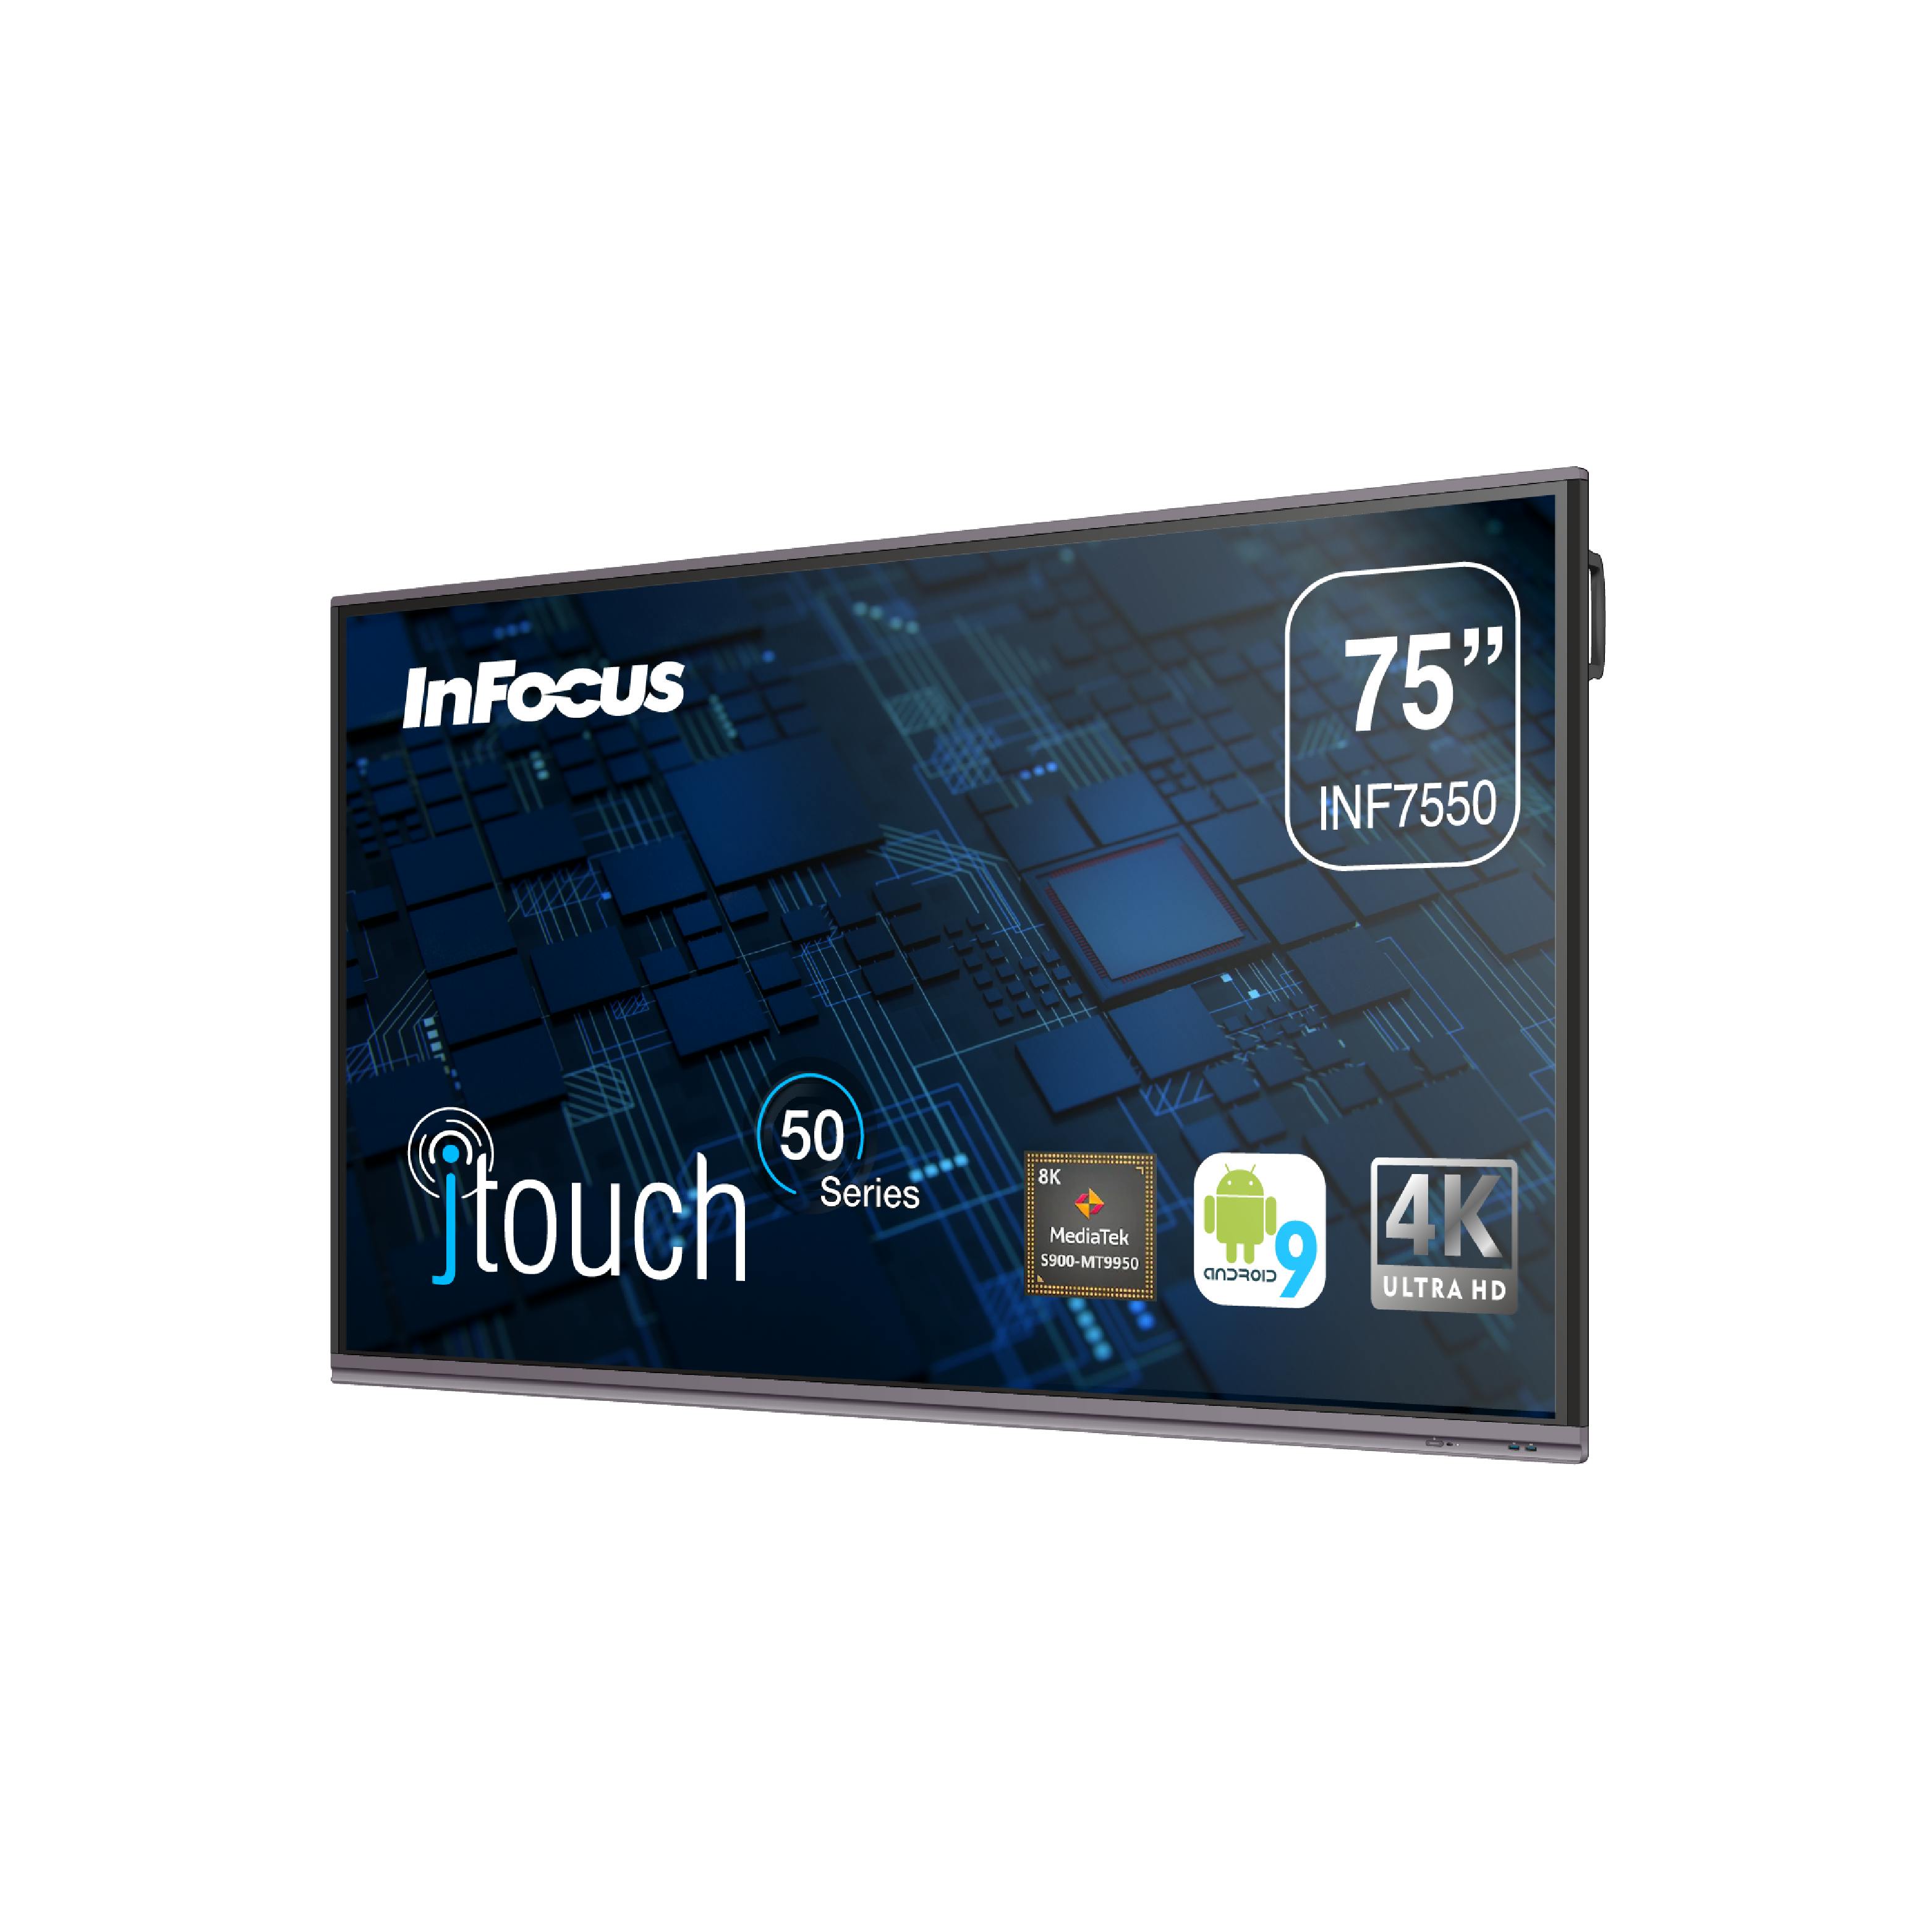 https://infocus.imgix.net/2022/04/JTouch-50-Series_INF7550_FR_90-01.png?auto=compress%2Cformat&ixlib=php-3.3.0